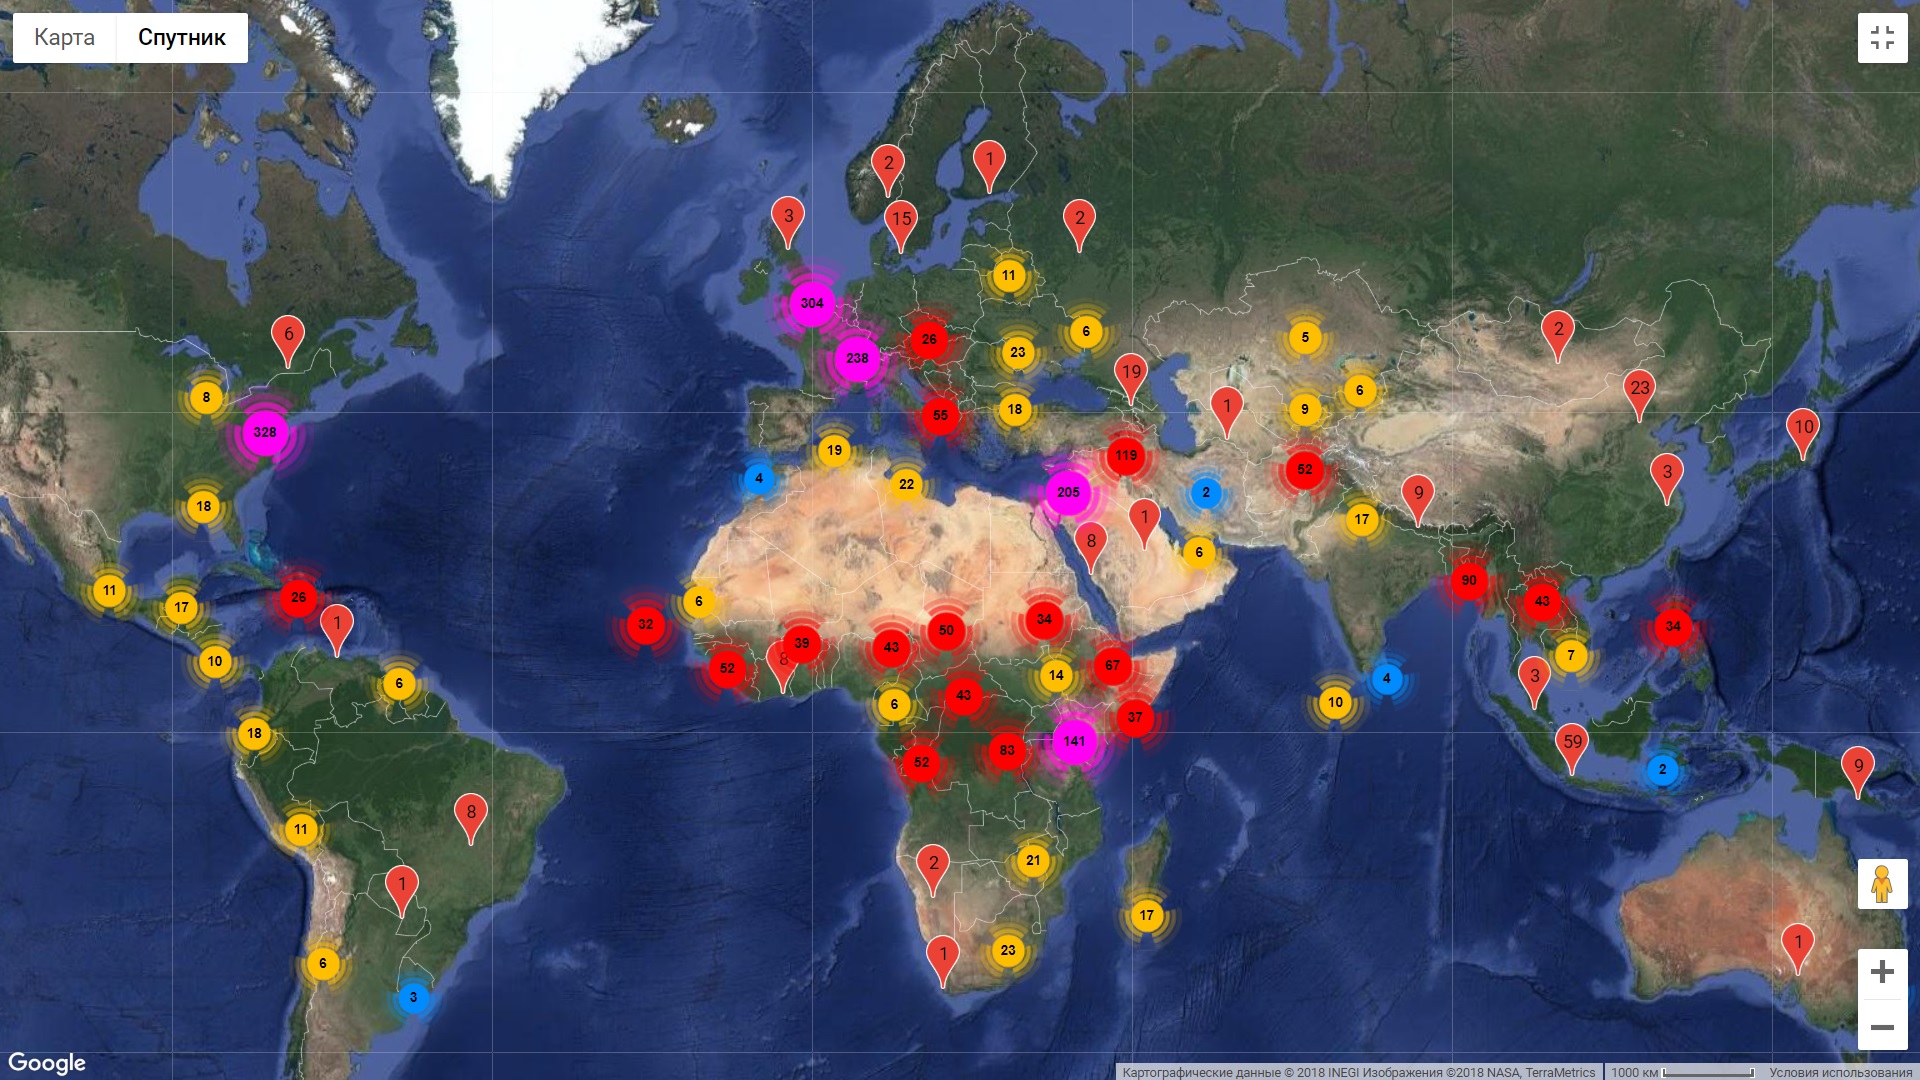 All NGO posts on the Google map